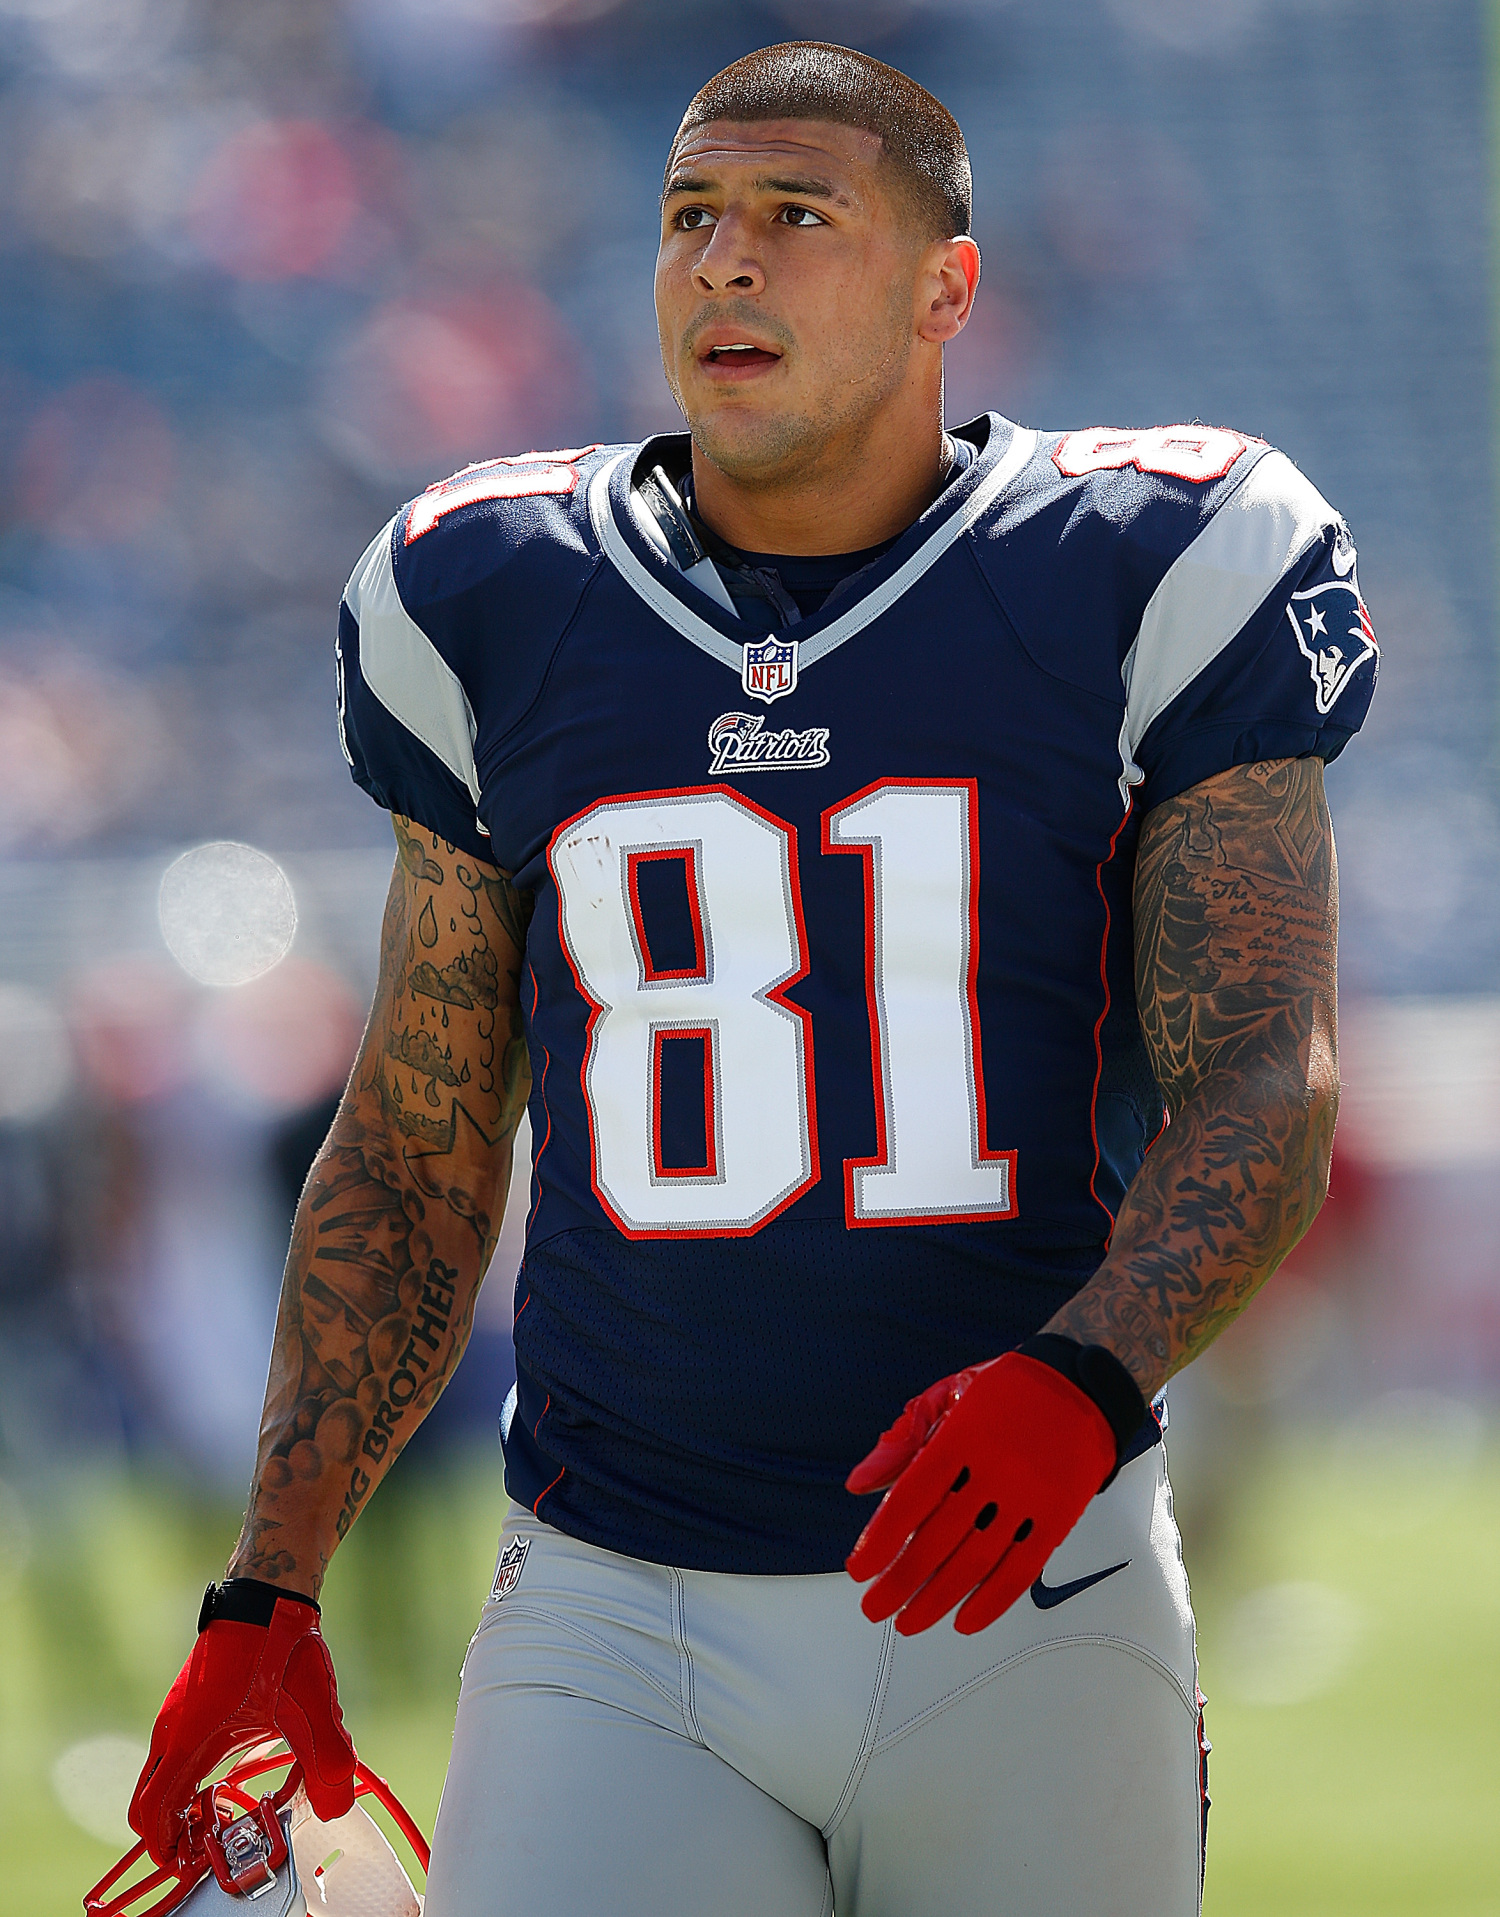 In final hours, NFL star Aaron Hernandez thought of family, not football